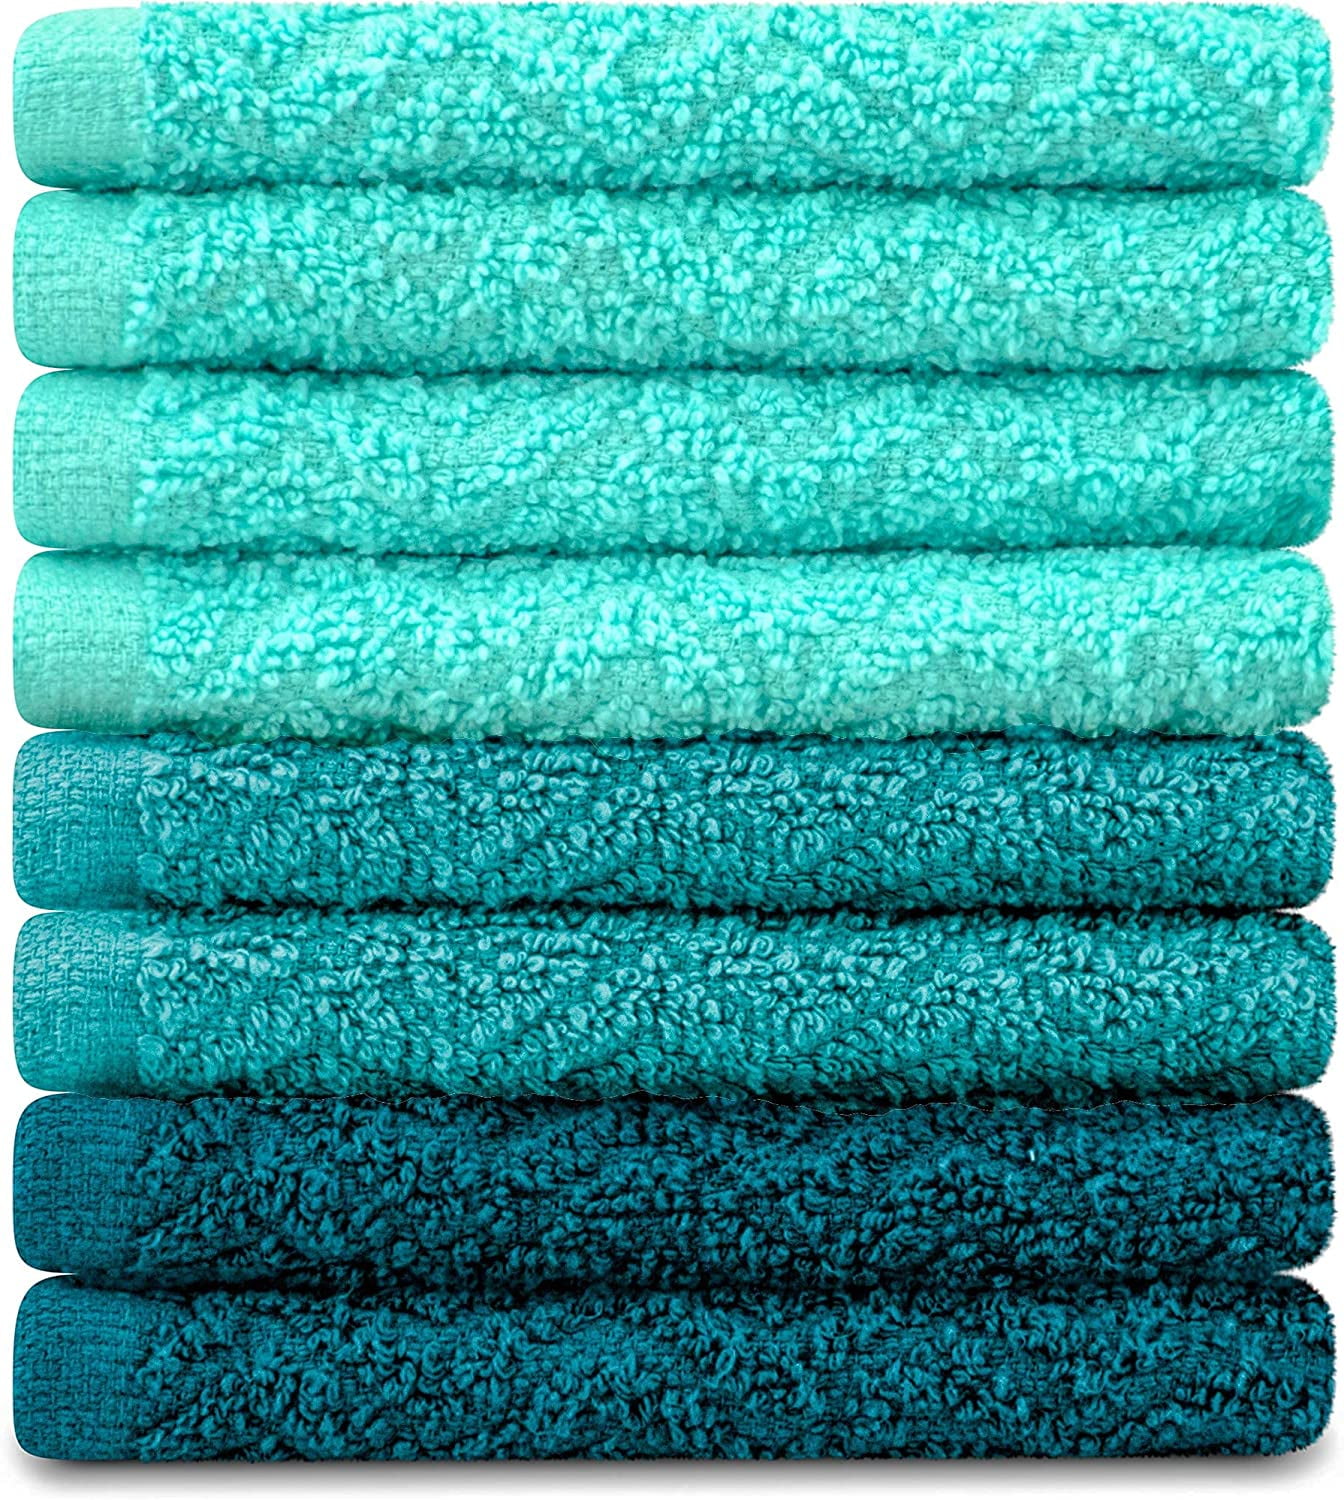 Dish Towels For Kitchen Cotton Towels Tea Rags Washing Teal Clothes 8 Pack,  NEW